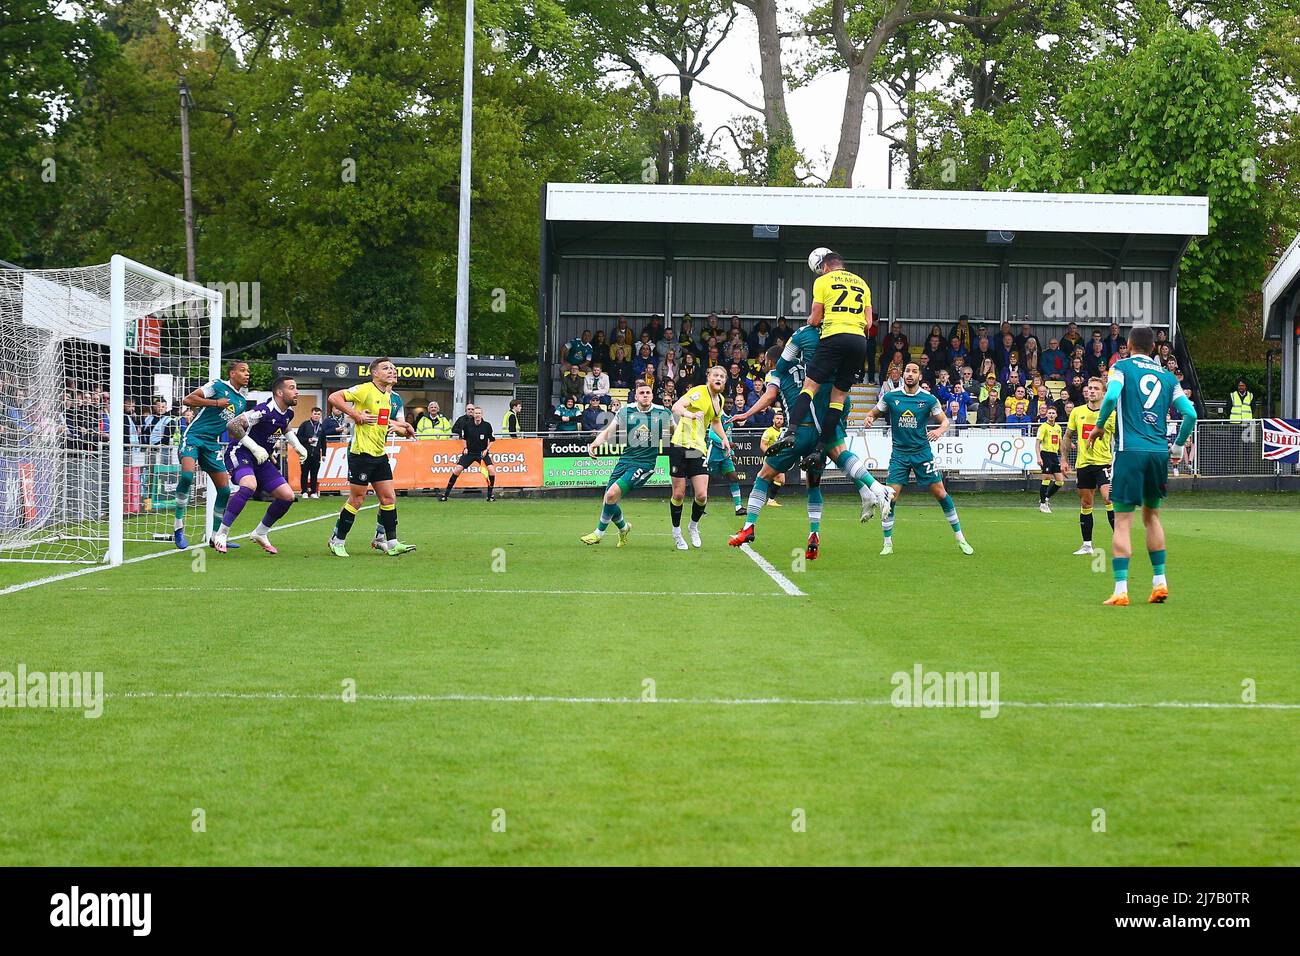 The EnviroVent Stadium, Harrogate, England - 7th May 2022 Rory McArdle (23) of Harrogate with a towering header that hits the post - during the game Harrogate v Sutton, EFL League 2, 2021/22, at The EnviroVent Stadium, Harrogate, England - 7th May 2022  Credit: Arthur Haigh/WhiteRosePhotos/Alamy Live News Stock Photo